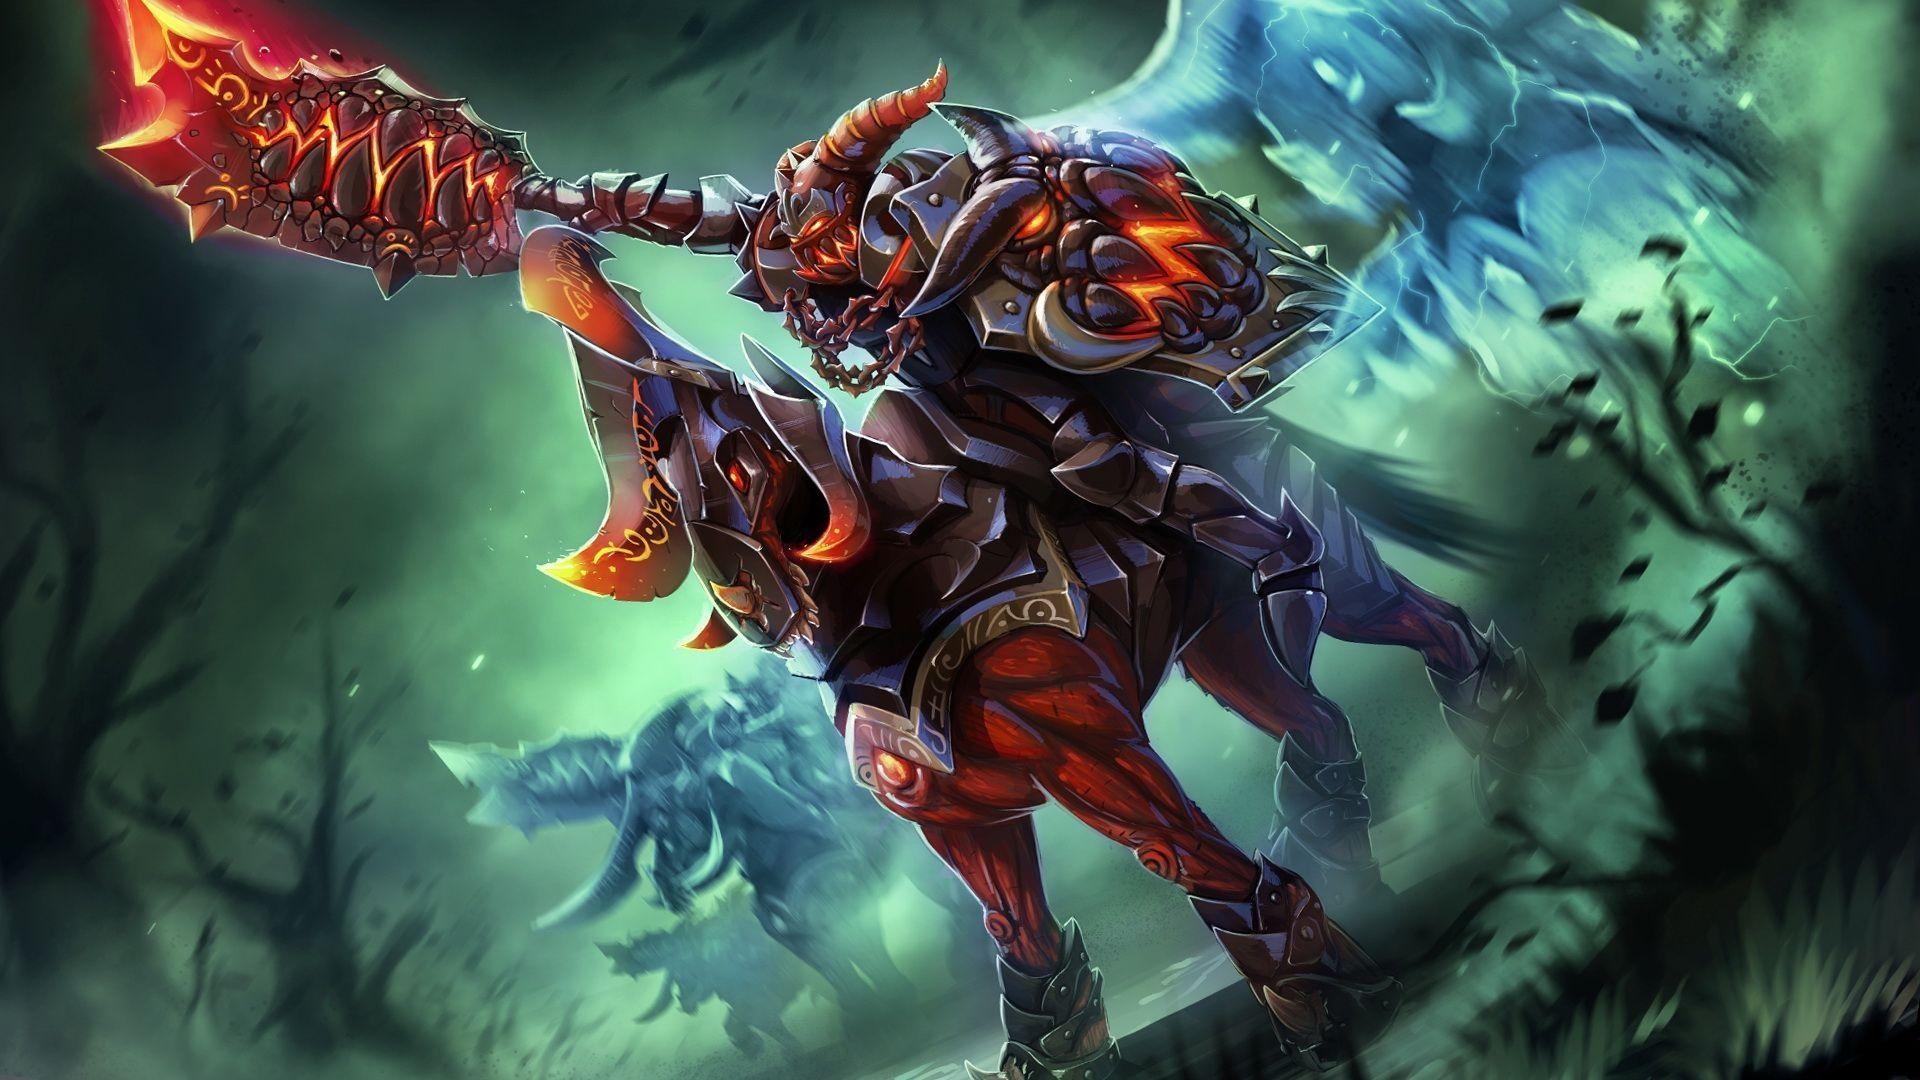 Download Dota 2 Chaos Knight Wallpaper High Definition Is Cool